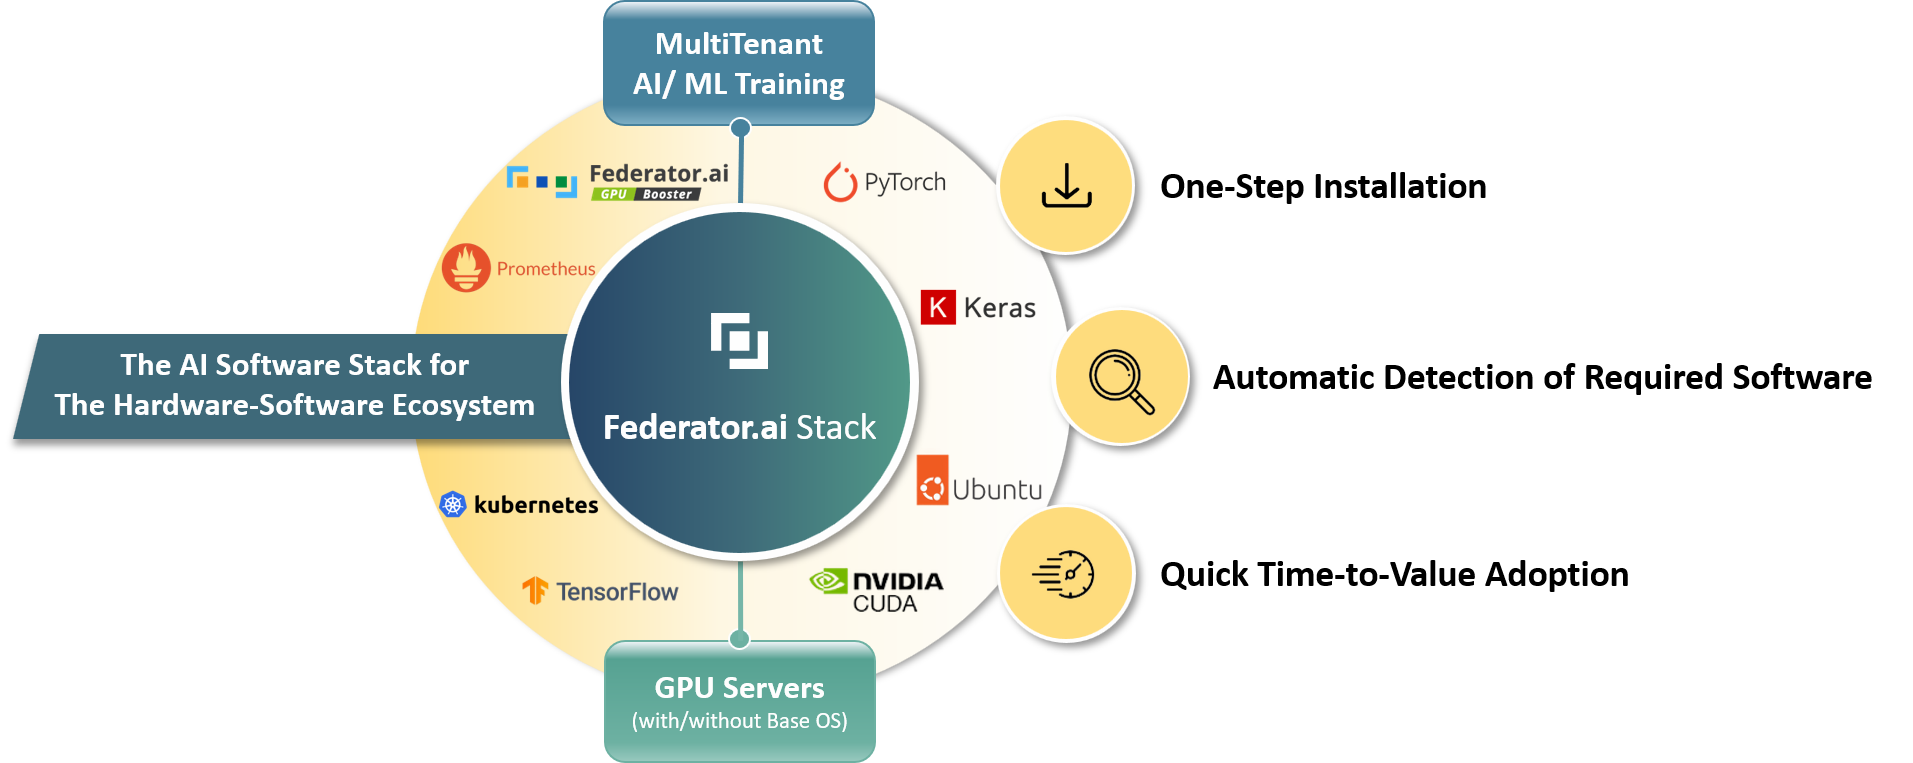 The Benefits of the Federator.ai Stack